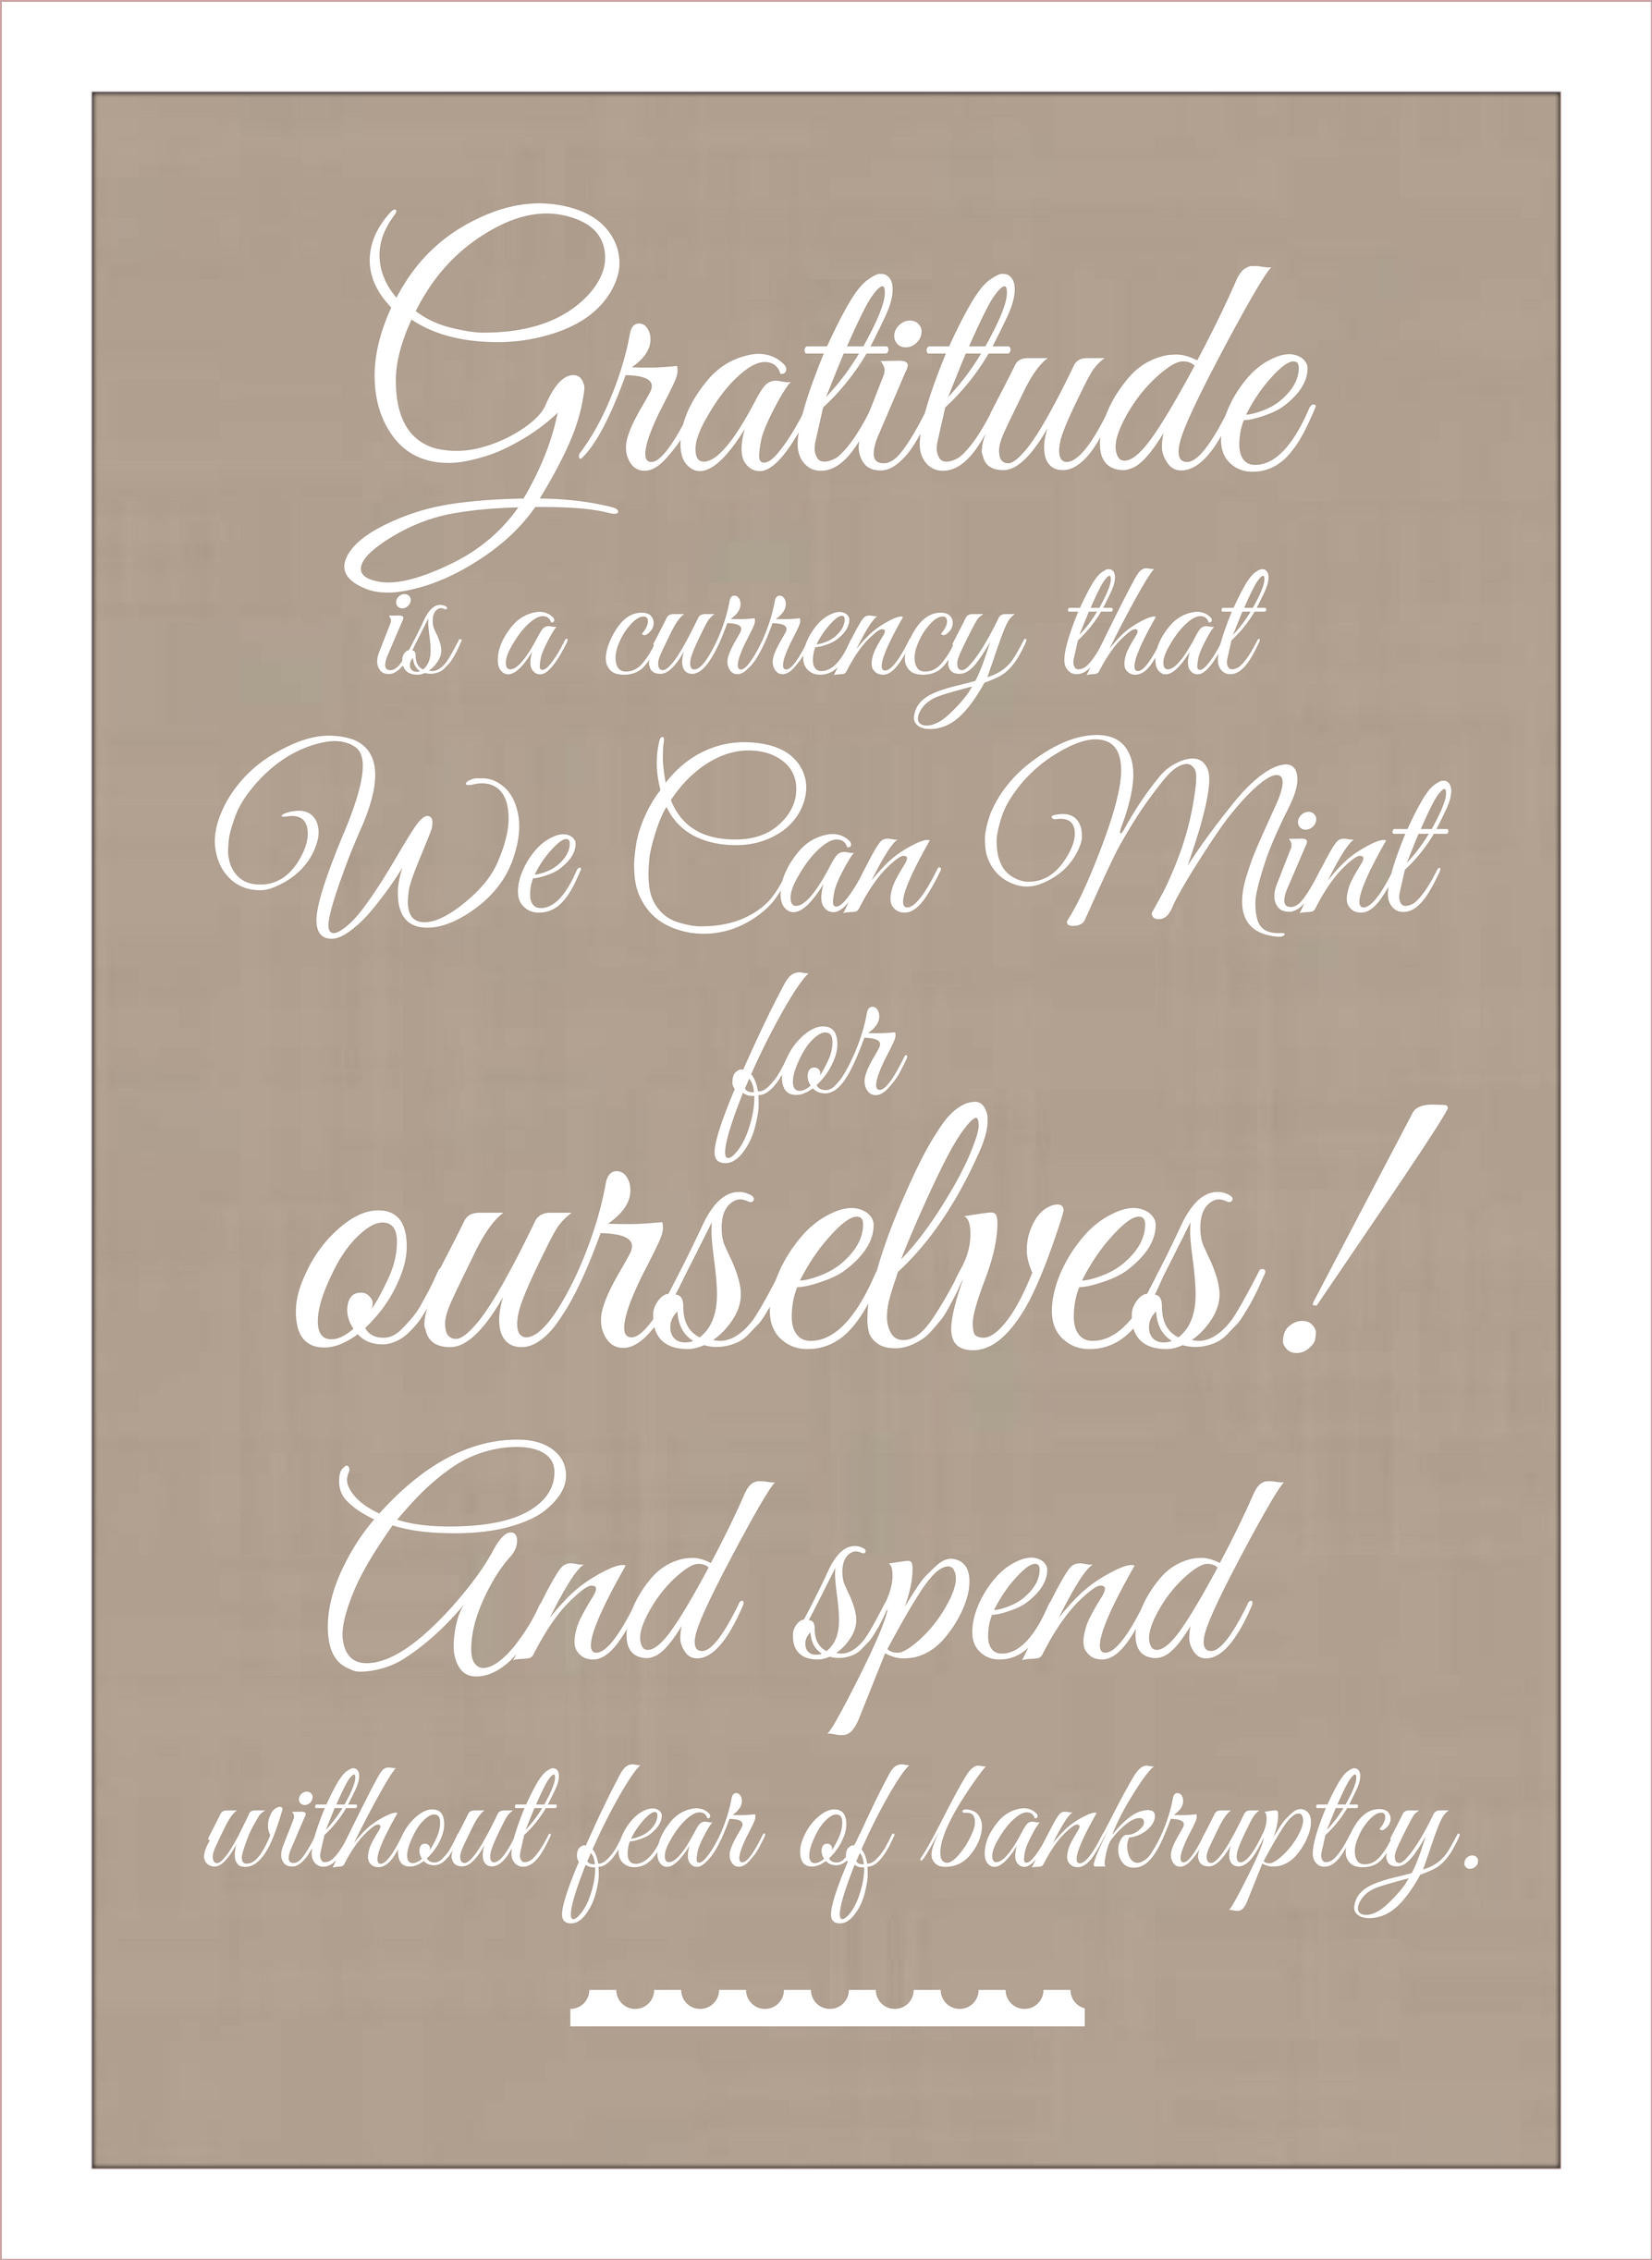 Thanksgiving Quotes Thanksgivingquotes
 25 Happy Thanksgiving Quotes As family and friends gather